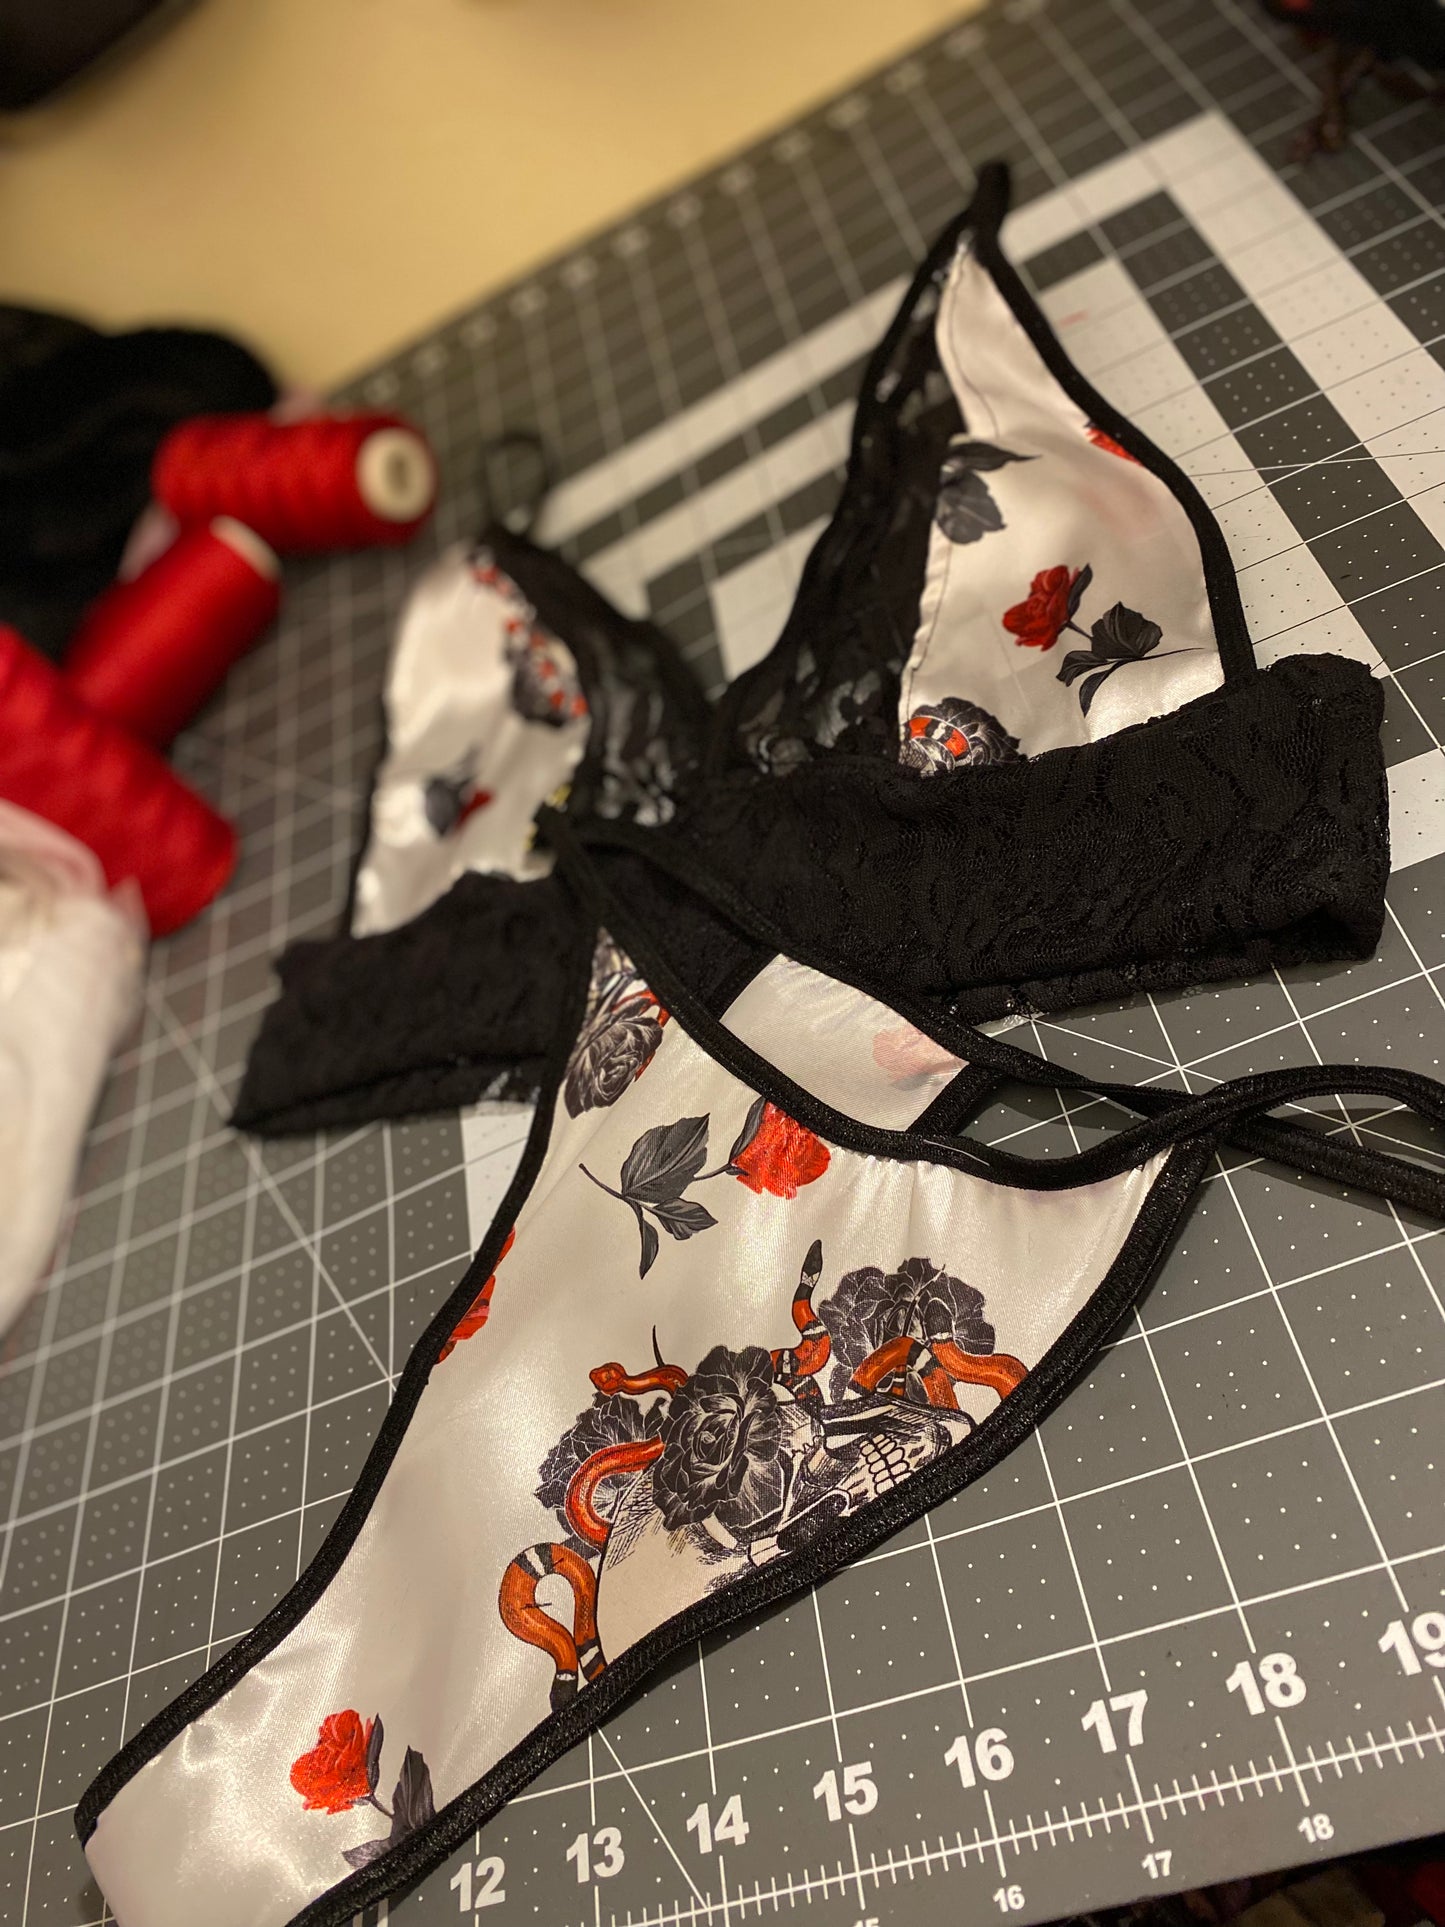 Skulls and Roses 2 piece thong lingerie